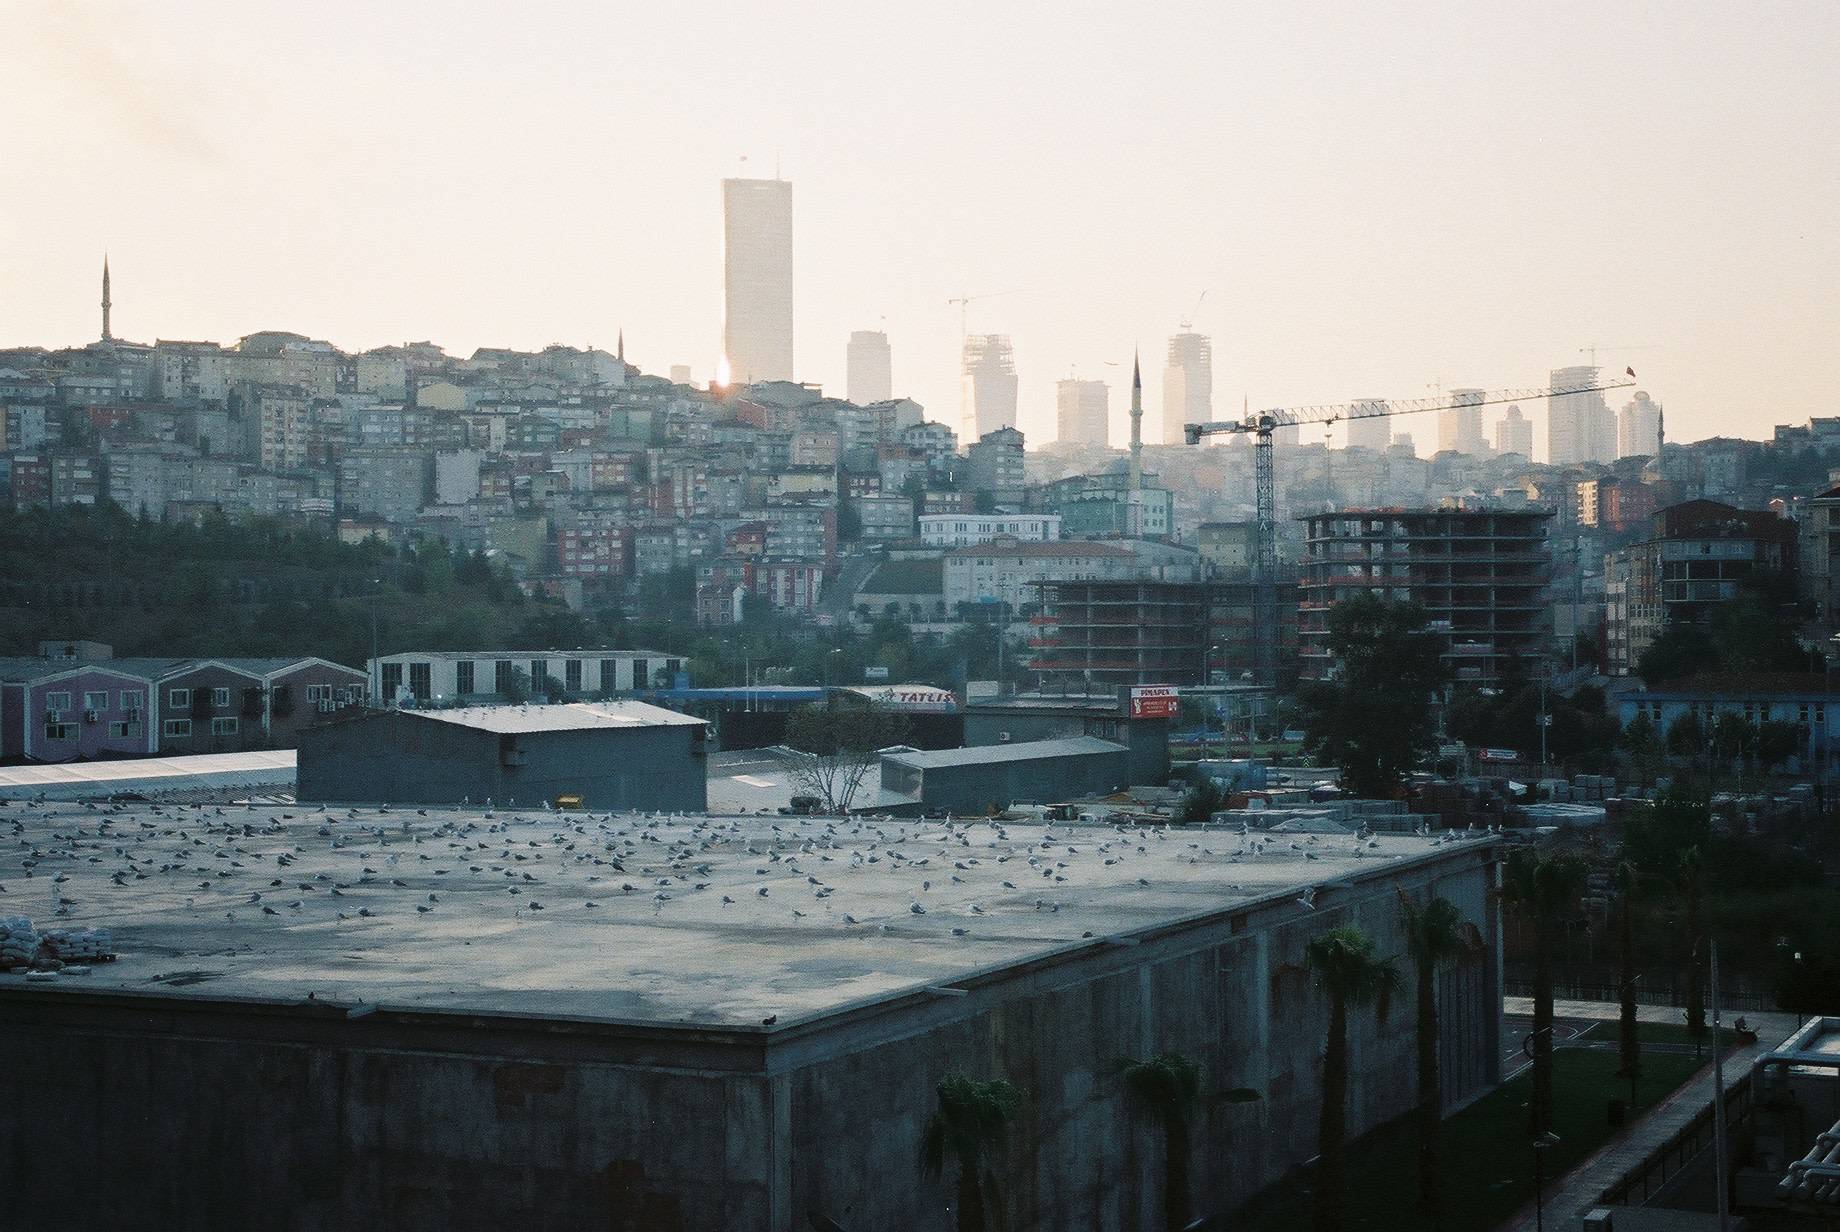 huge concrete structure with seagulls on top, sprawling urban area including several constructions behind it, sunrise and city skyline on the horizon